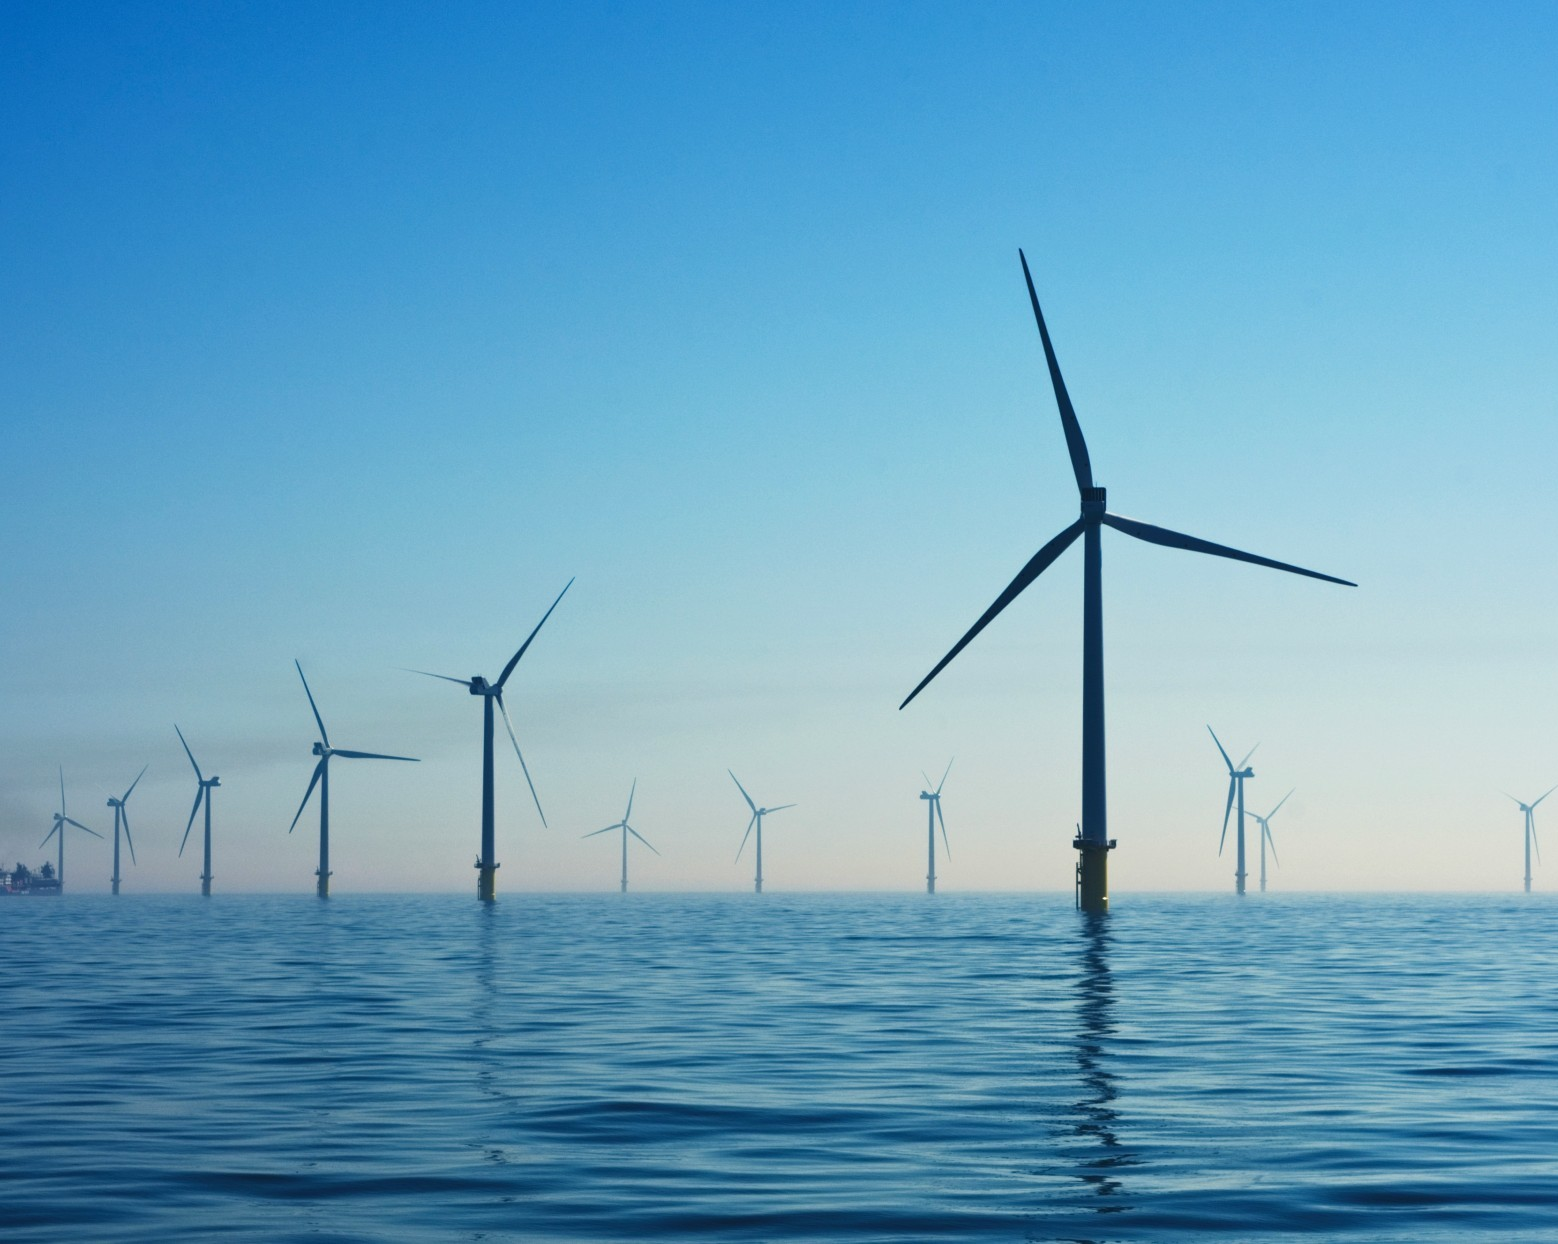 Offshore wind farms are vulnerable to cyberattacks, new Concordia study shows